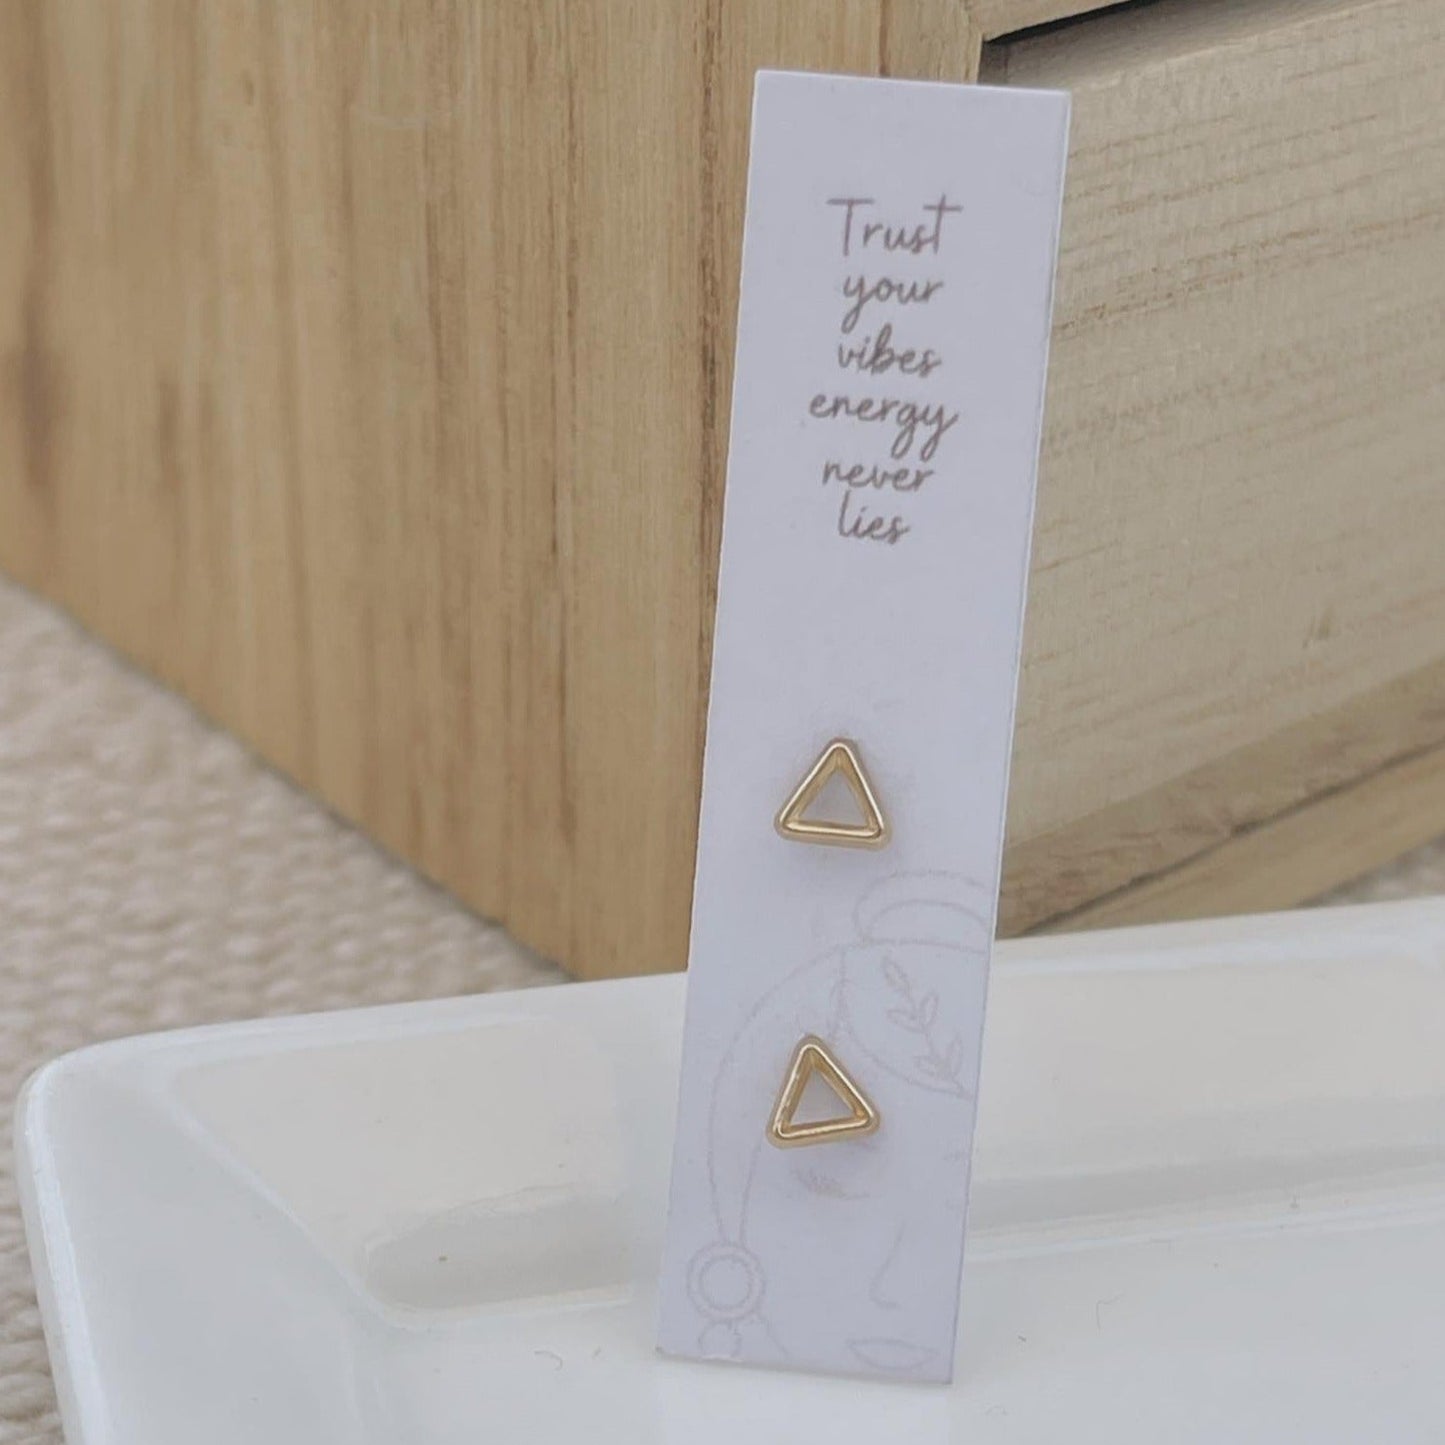 These delicate triangle studs are perfect for everyday. They are lightweight and made of 10K gold, so they won't irritate your ears. They can be worn with any outfit in any occasion and look great on everyone. These trendy geometric earrings make a great gift!ear stack